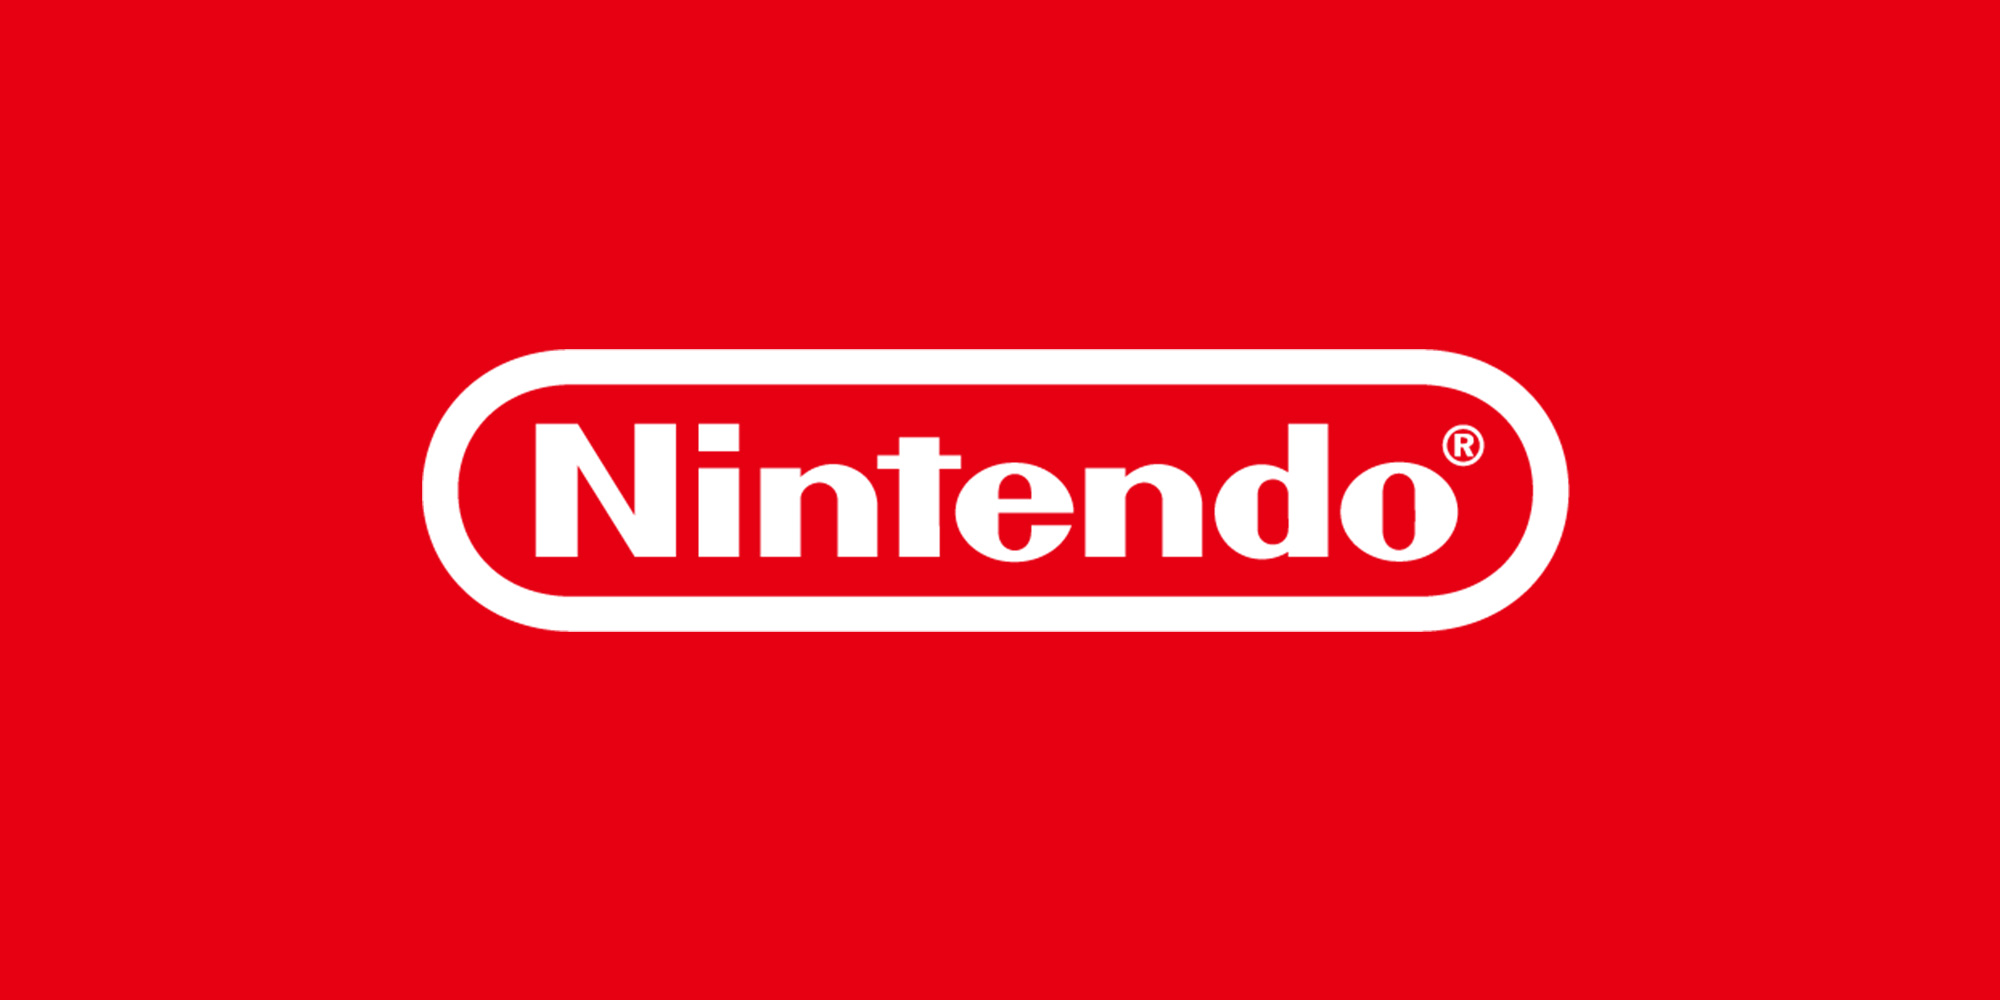 Nintendo Video | Watch videos in 3D without glasses